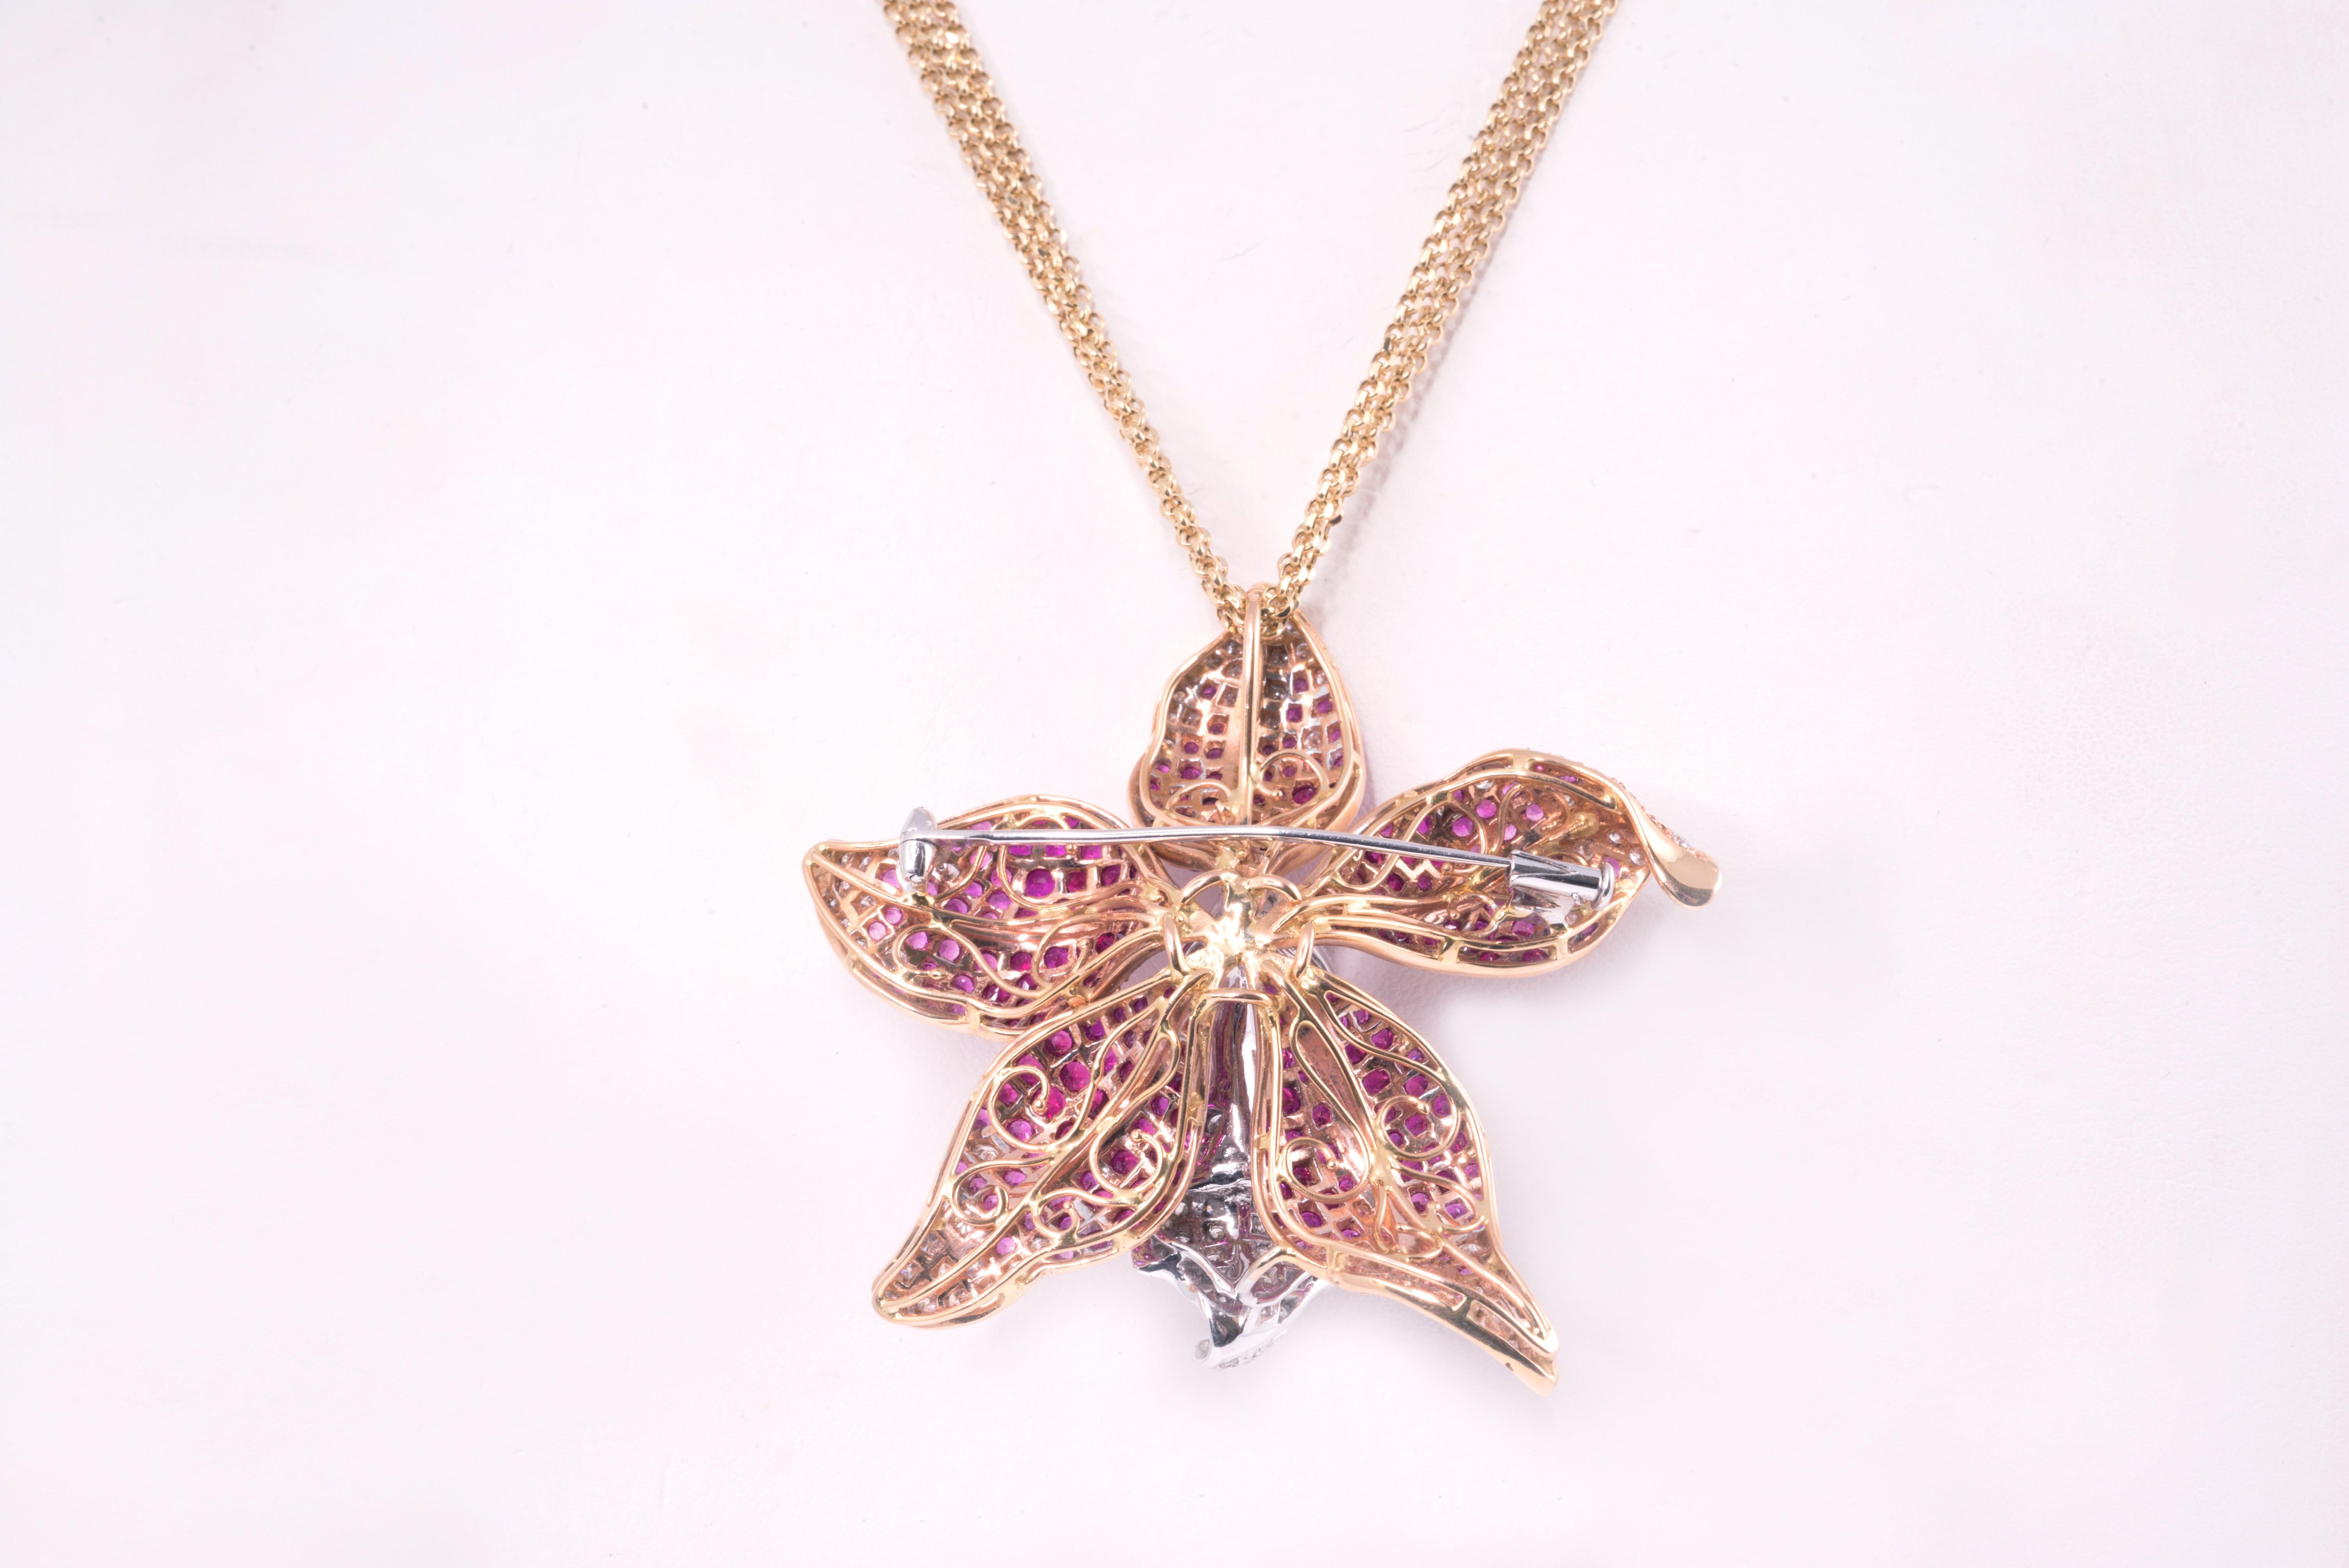 Necklace ,pendant and brooch withe and yellow gold 18 kt flower  with flower ct 14,25 and diamonds ct 4,86 colour G Vs1.
total weight 55,70 gr. There is a chain to adjust the lenght of the necklace.